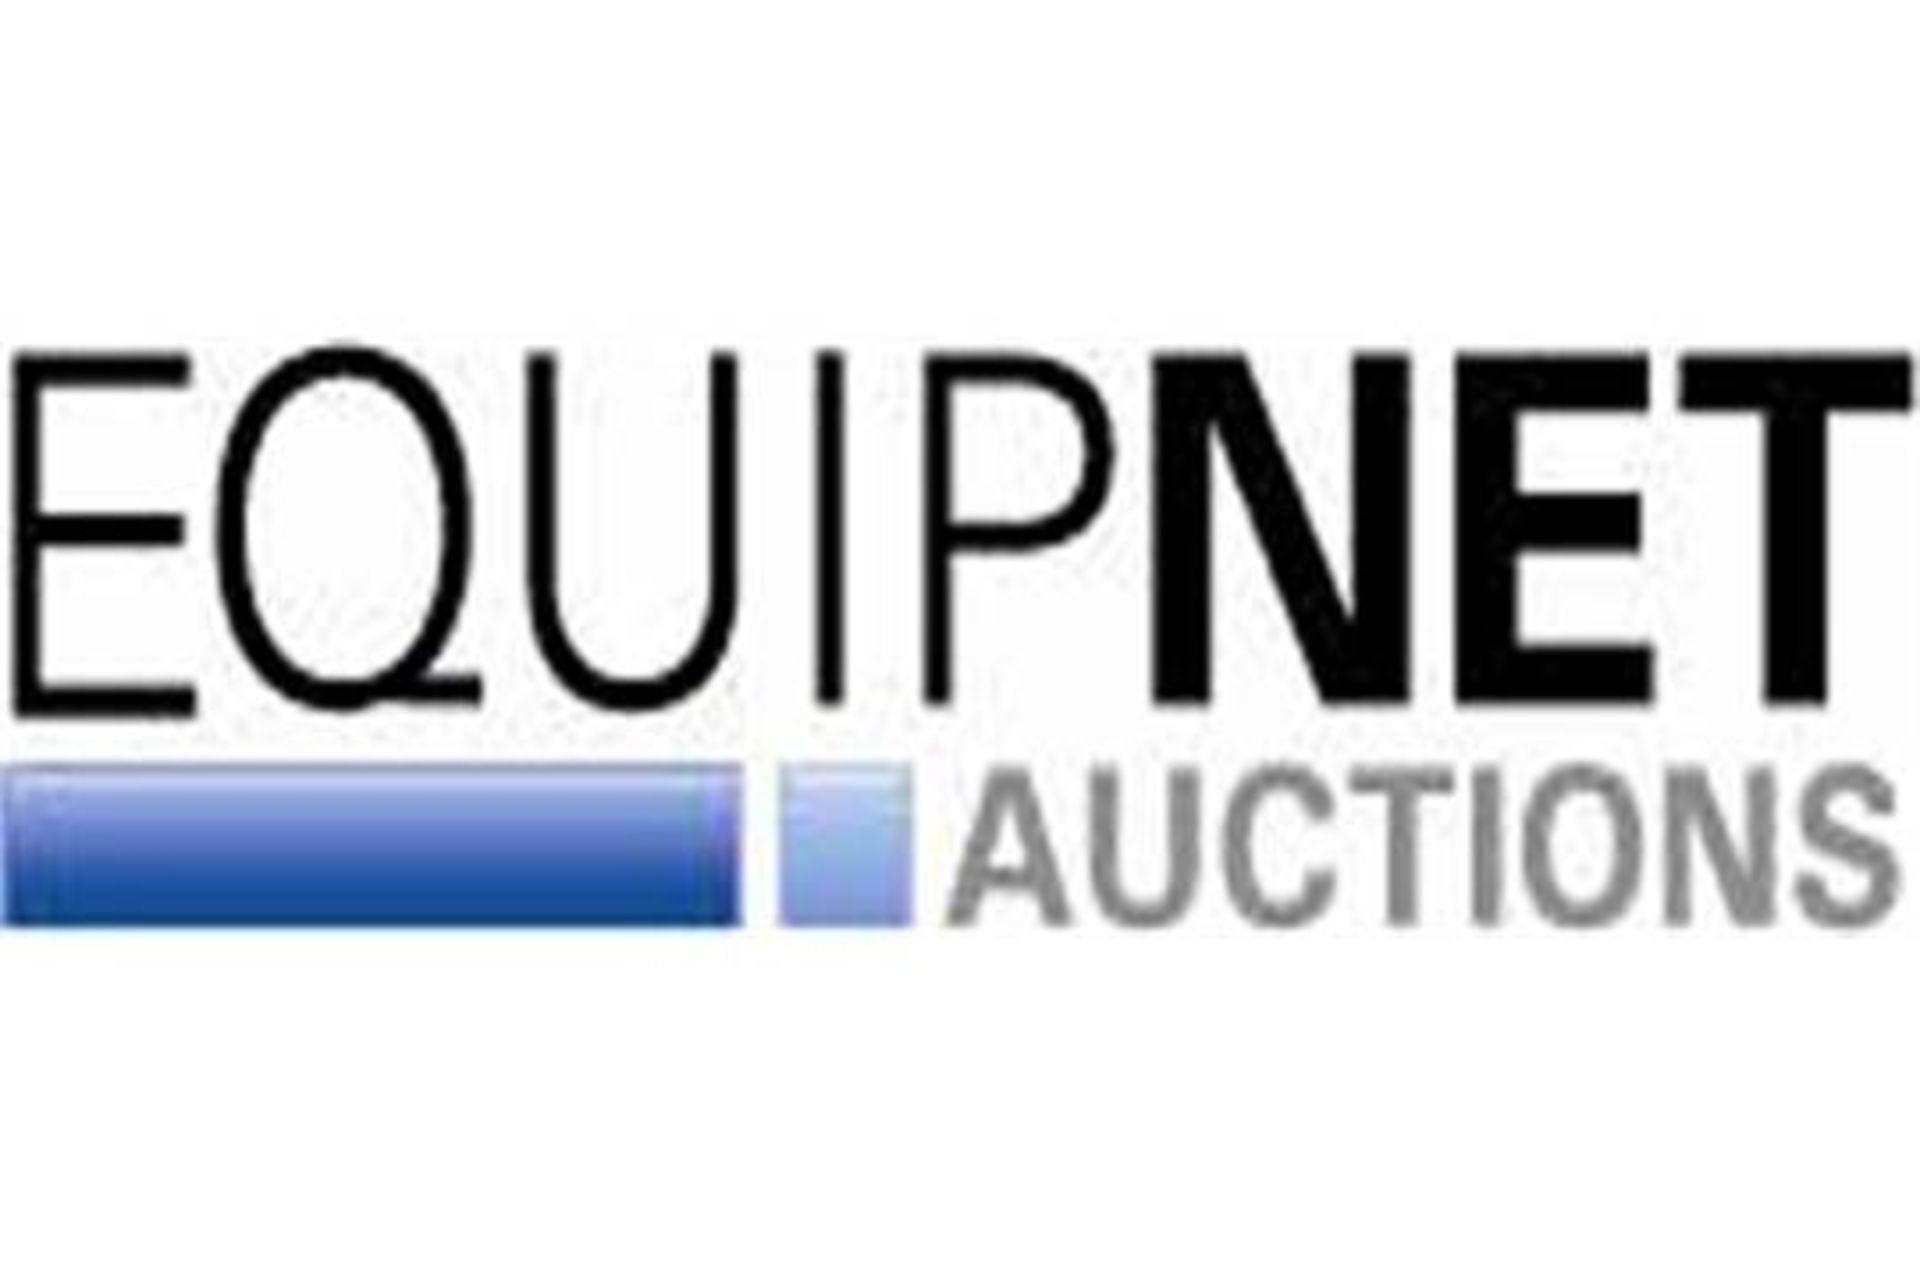 This is a catalog only auction being held by EquipNet, Inc.